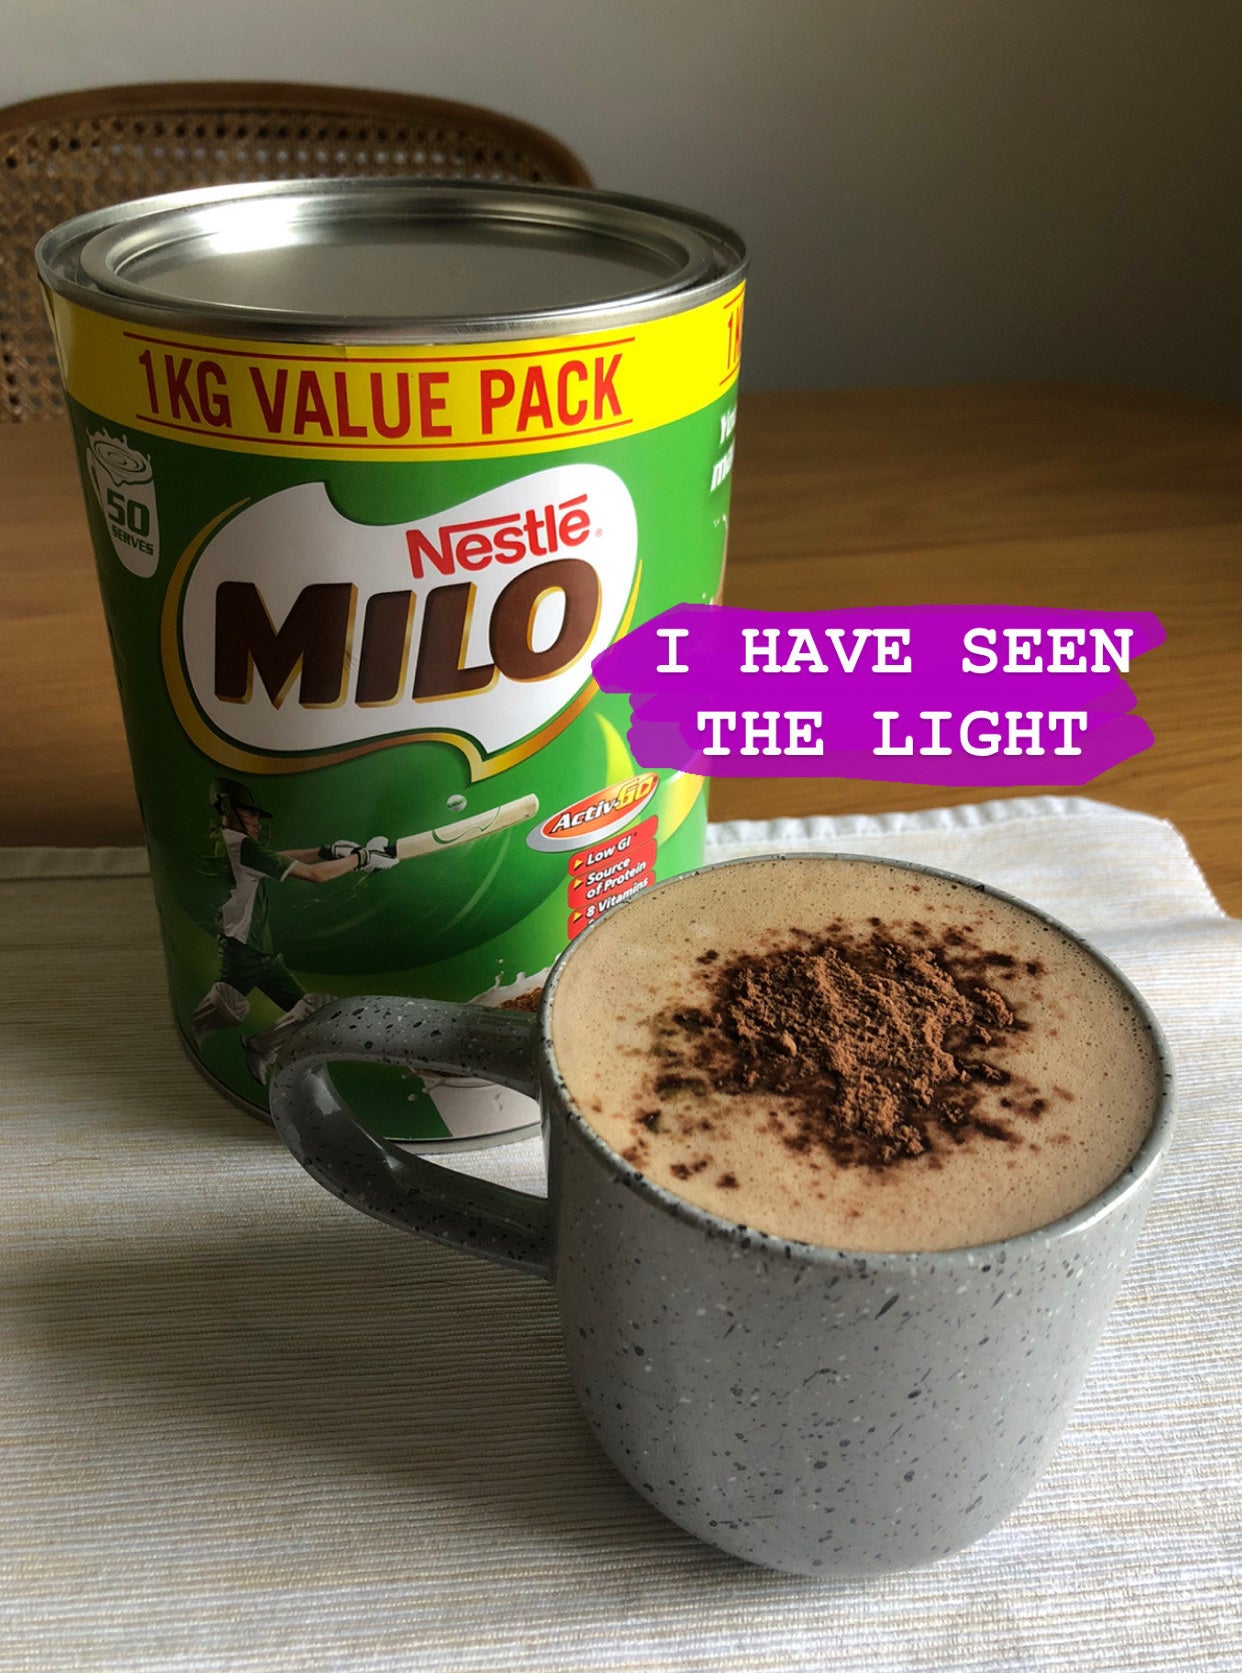 Can of Nestlé&#x27;s Milo next to a cup of Milo and Joe